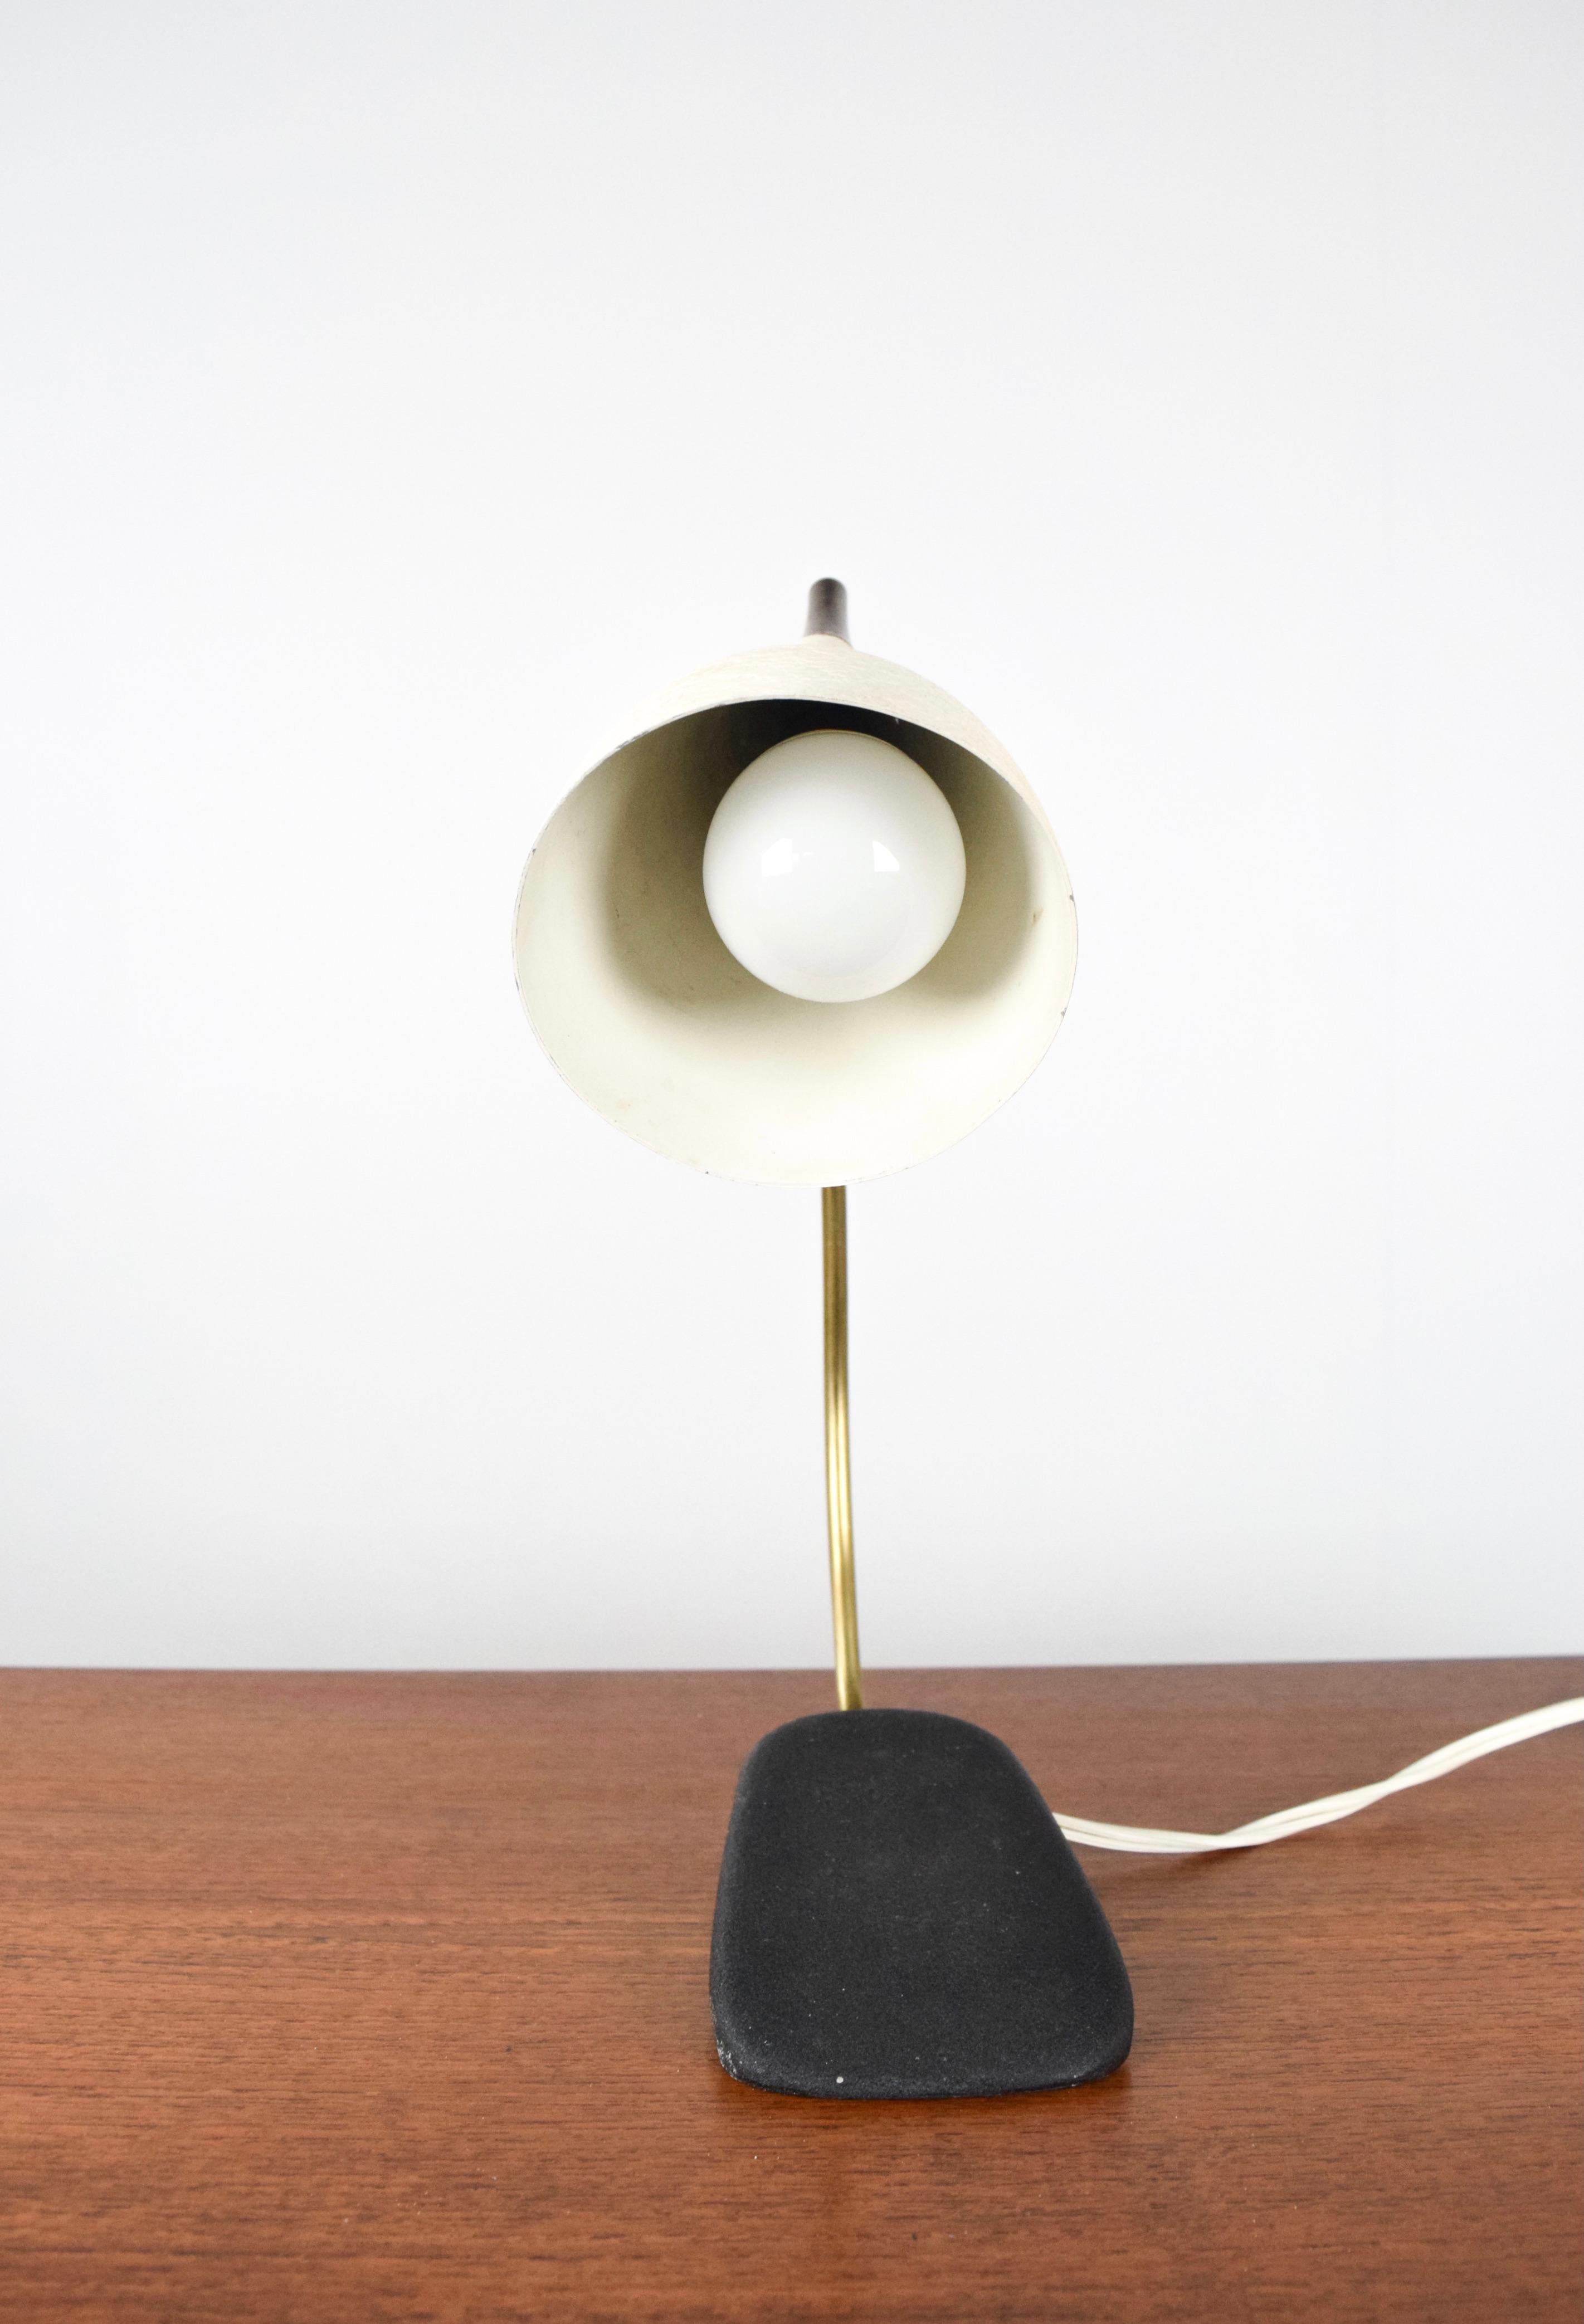 Minimalist Desk Lamp by Gebrüder Cosack, Germany 1950's   In Good Condition For Sale In Hellouw, NL